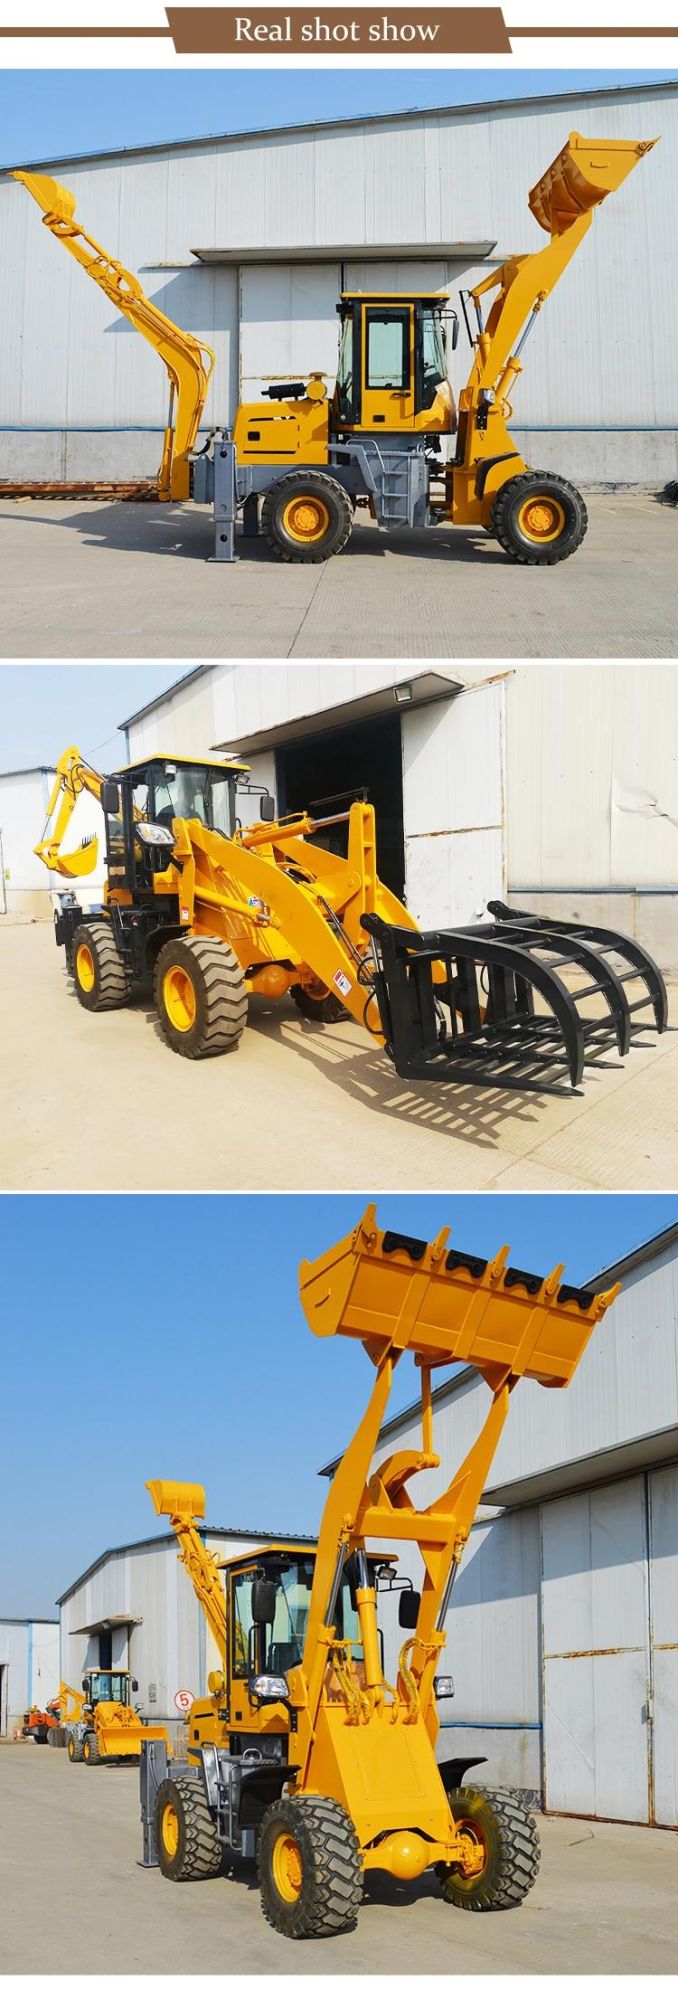 Mini Easy to Operate New Design Backhoe Loader Price